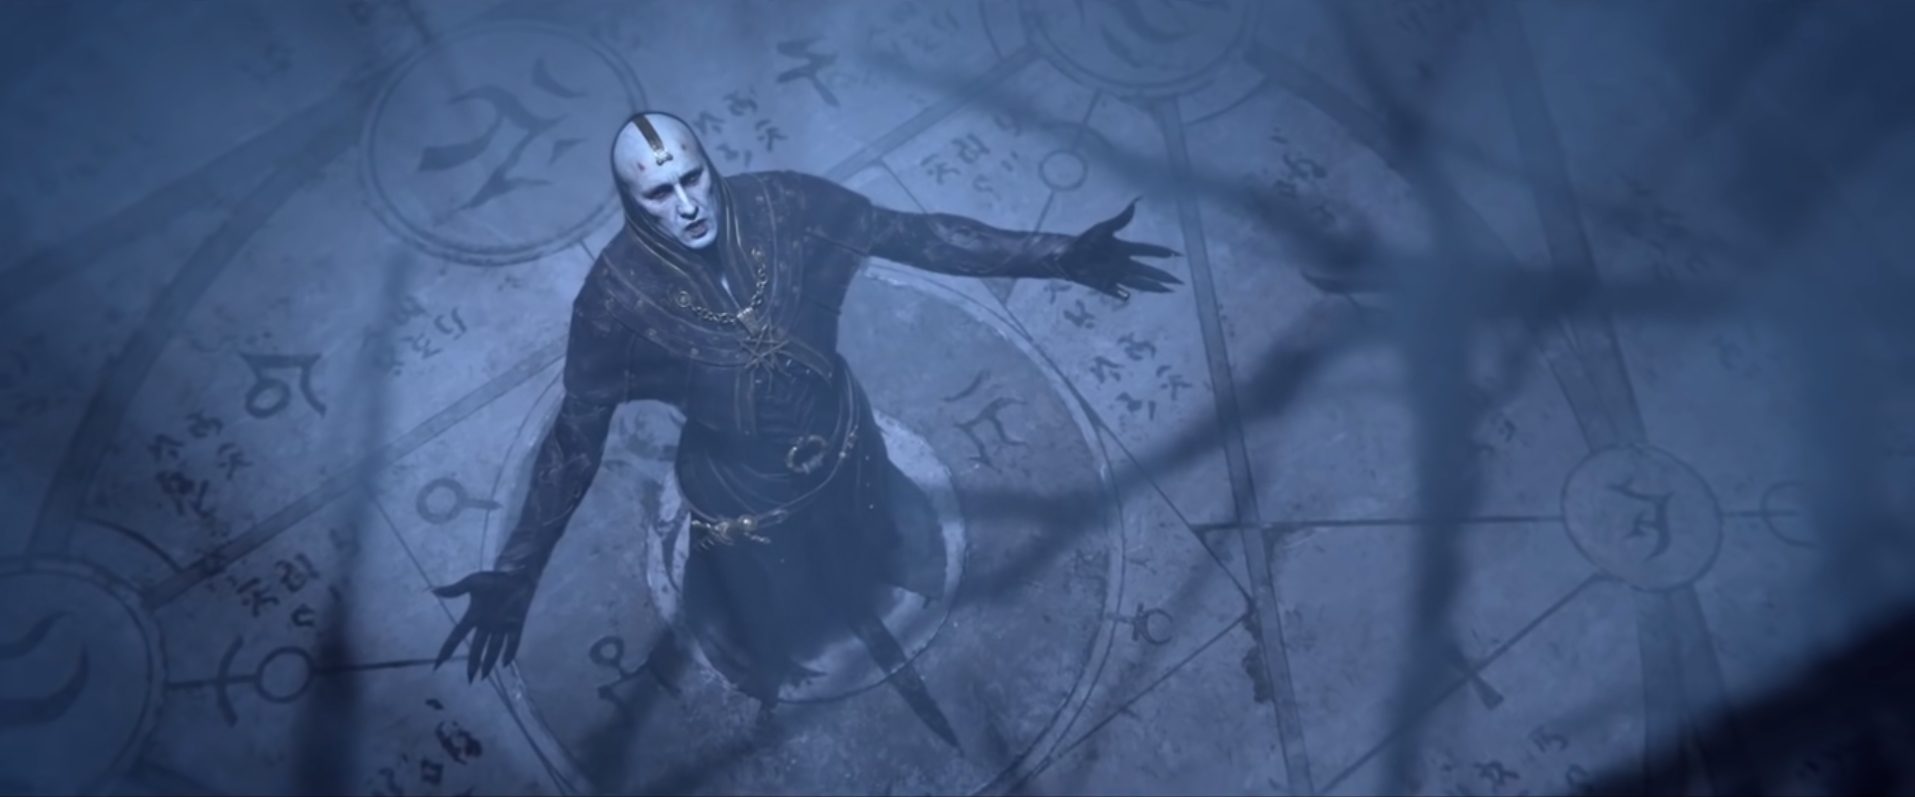 Lore Check: Who Is Rathma, The Pale Summoner Of The Diablo IV Cinematic Trailer?